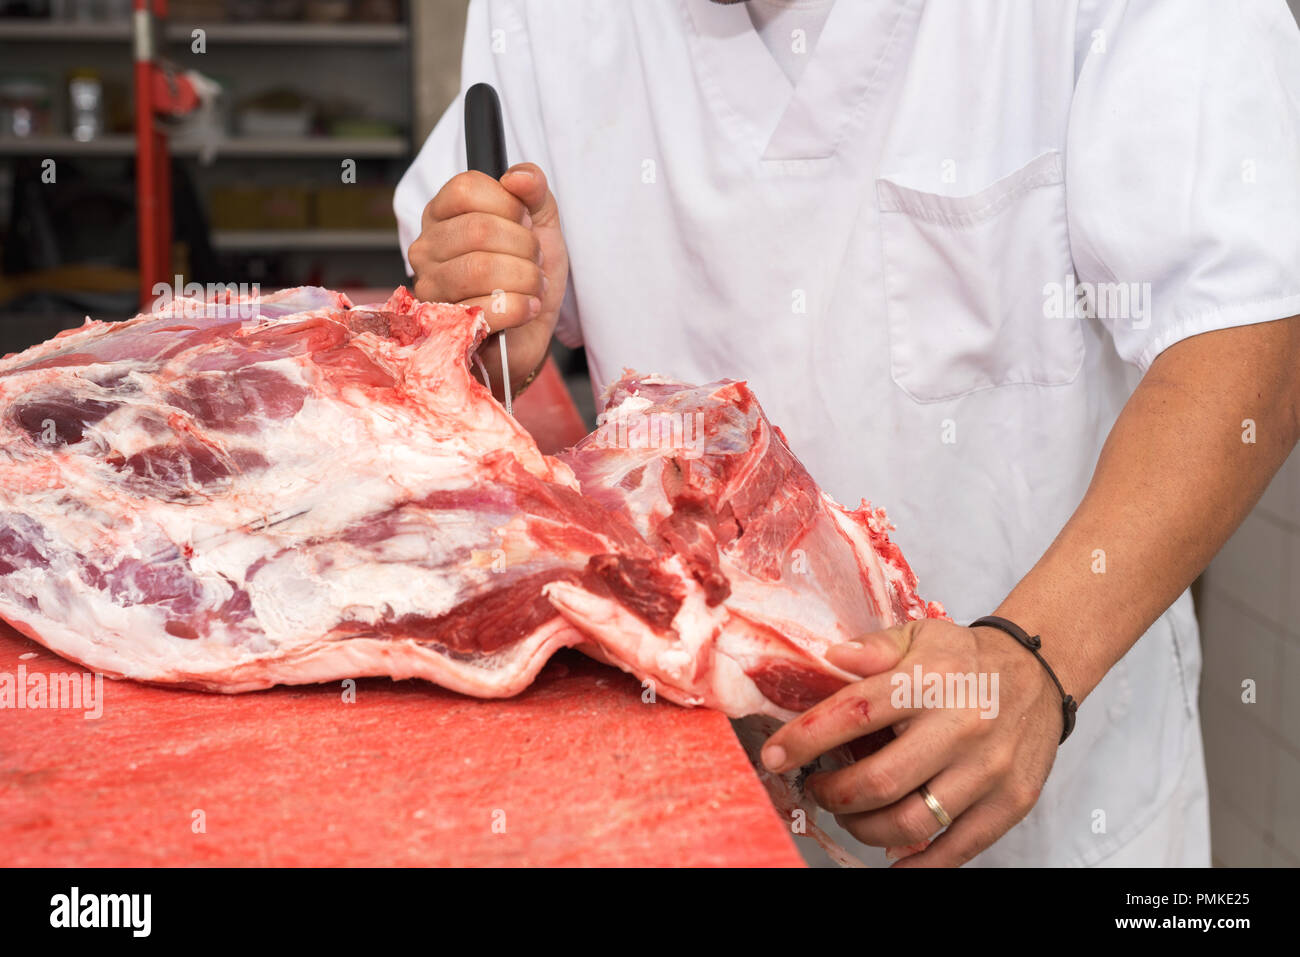 In-Depth Guide to Owning a Meat Knife in 2023 – Dalstrong